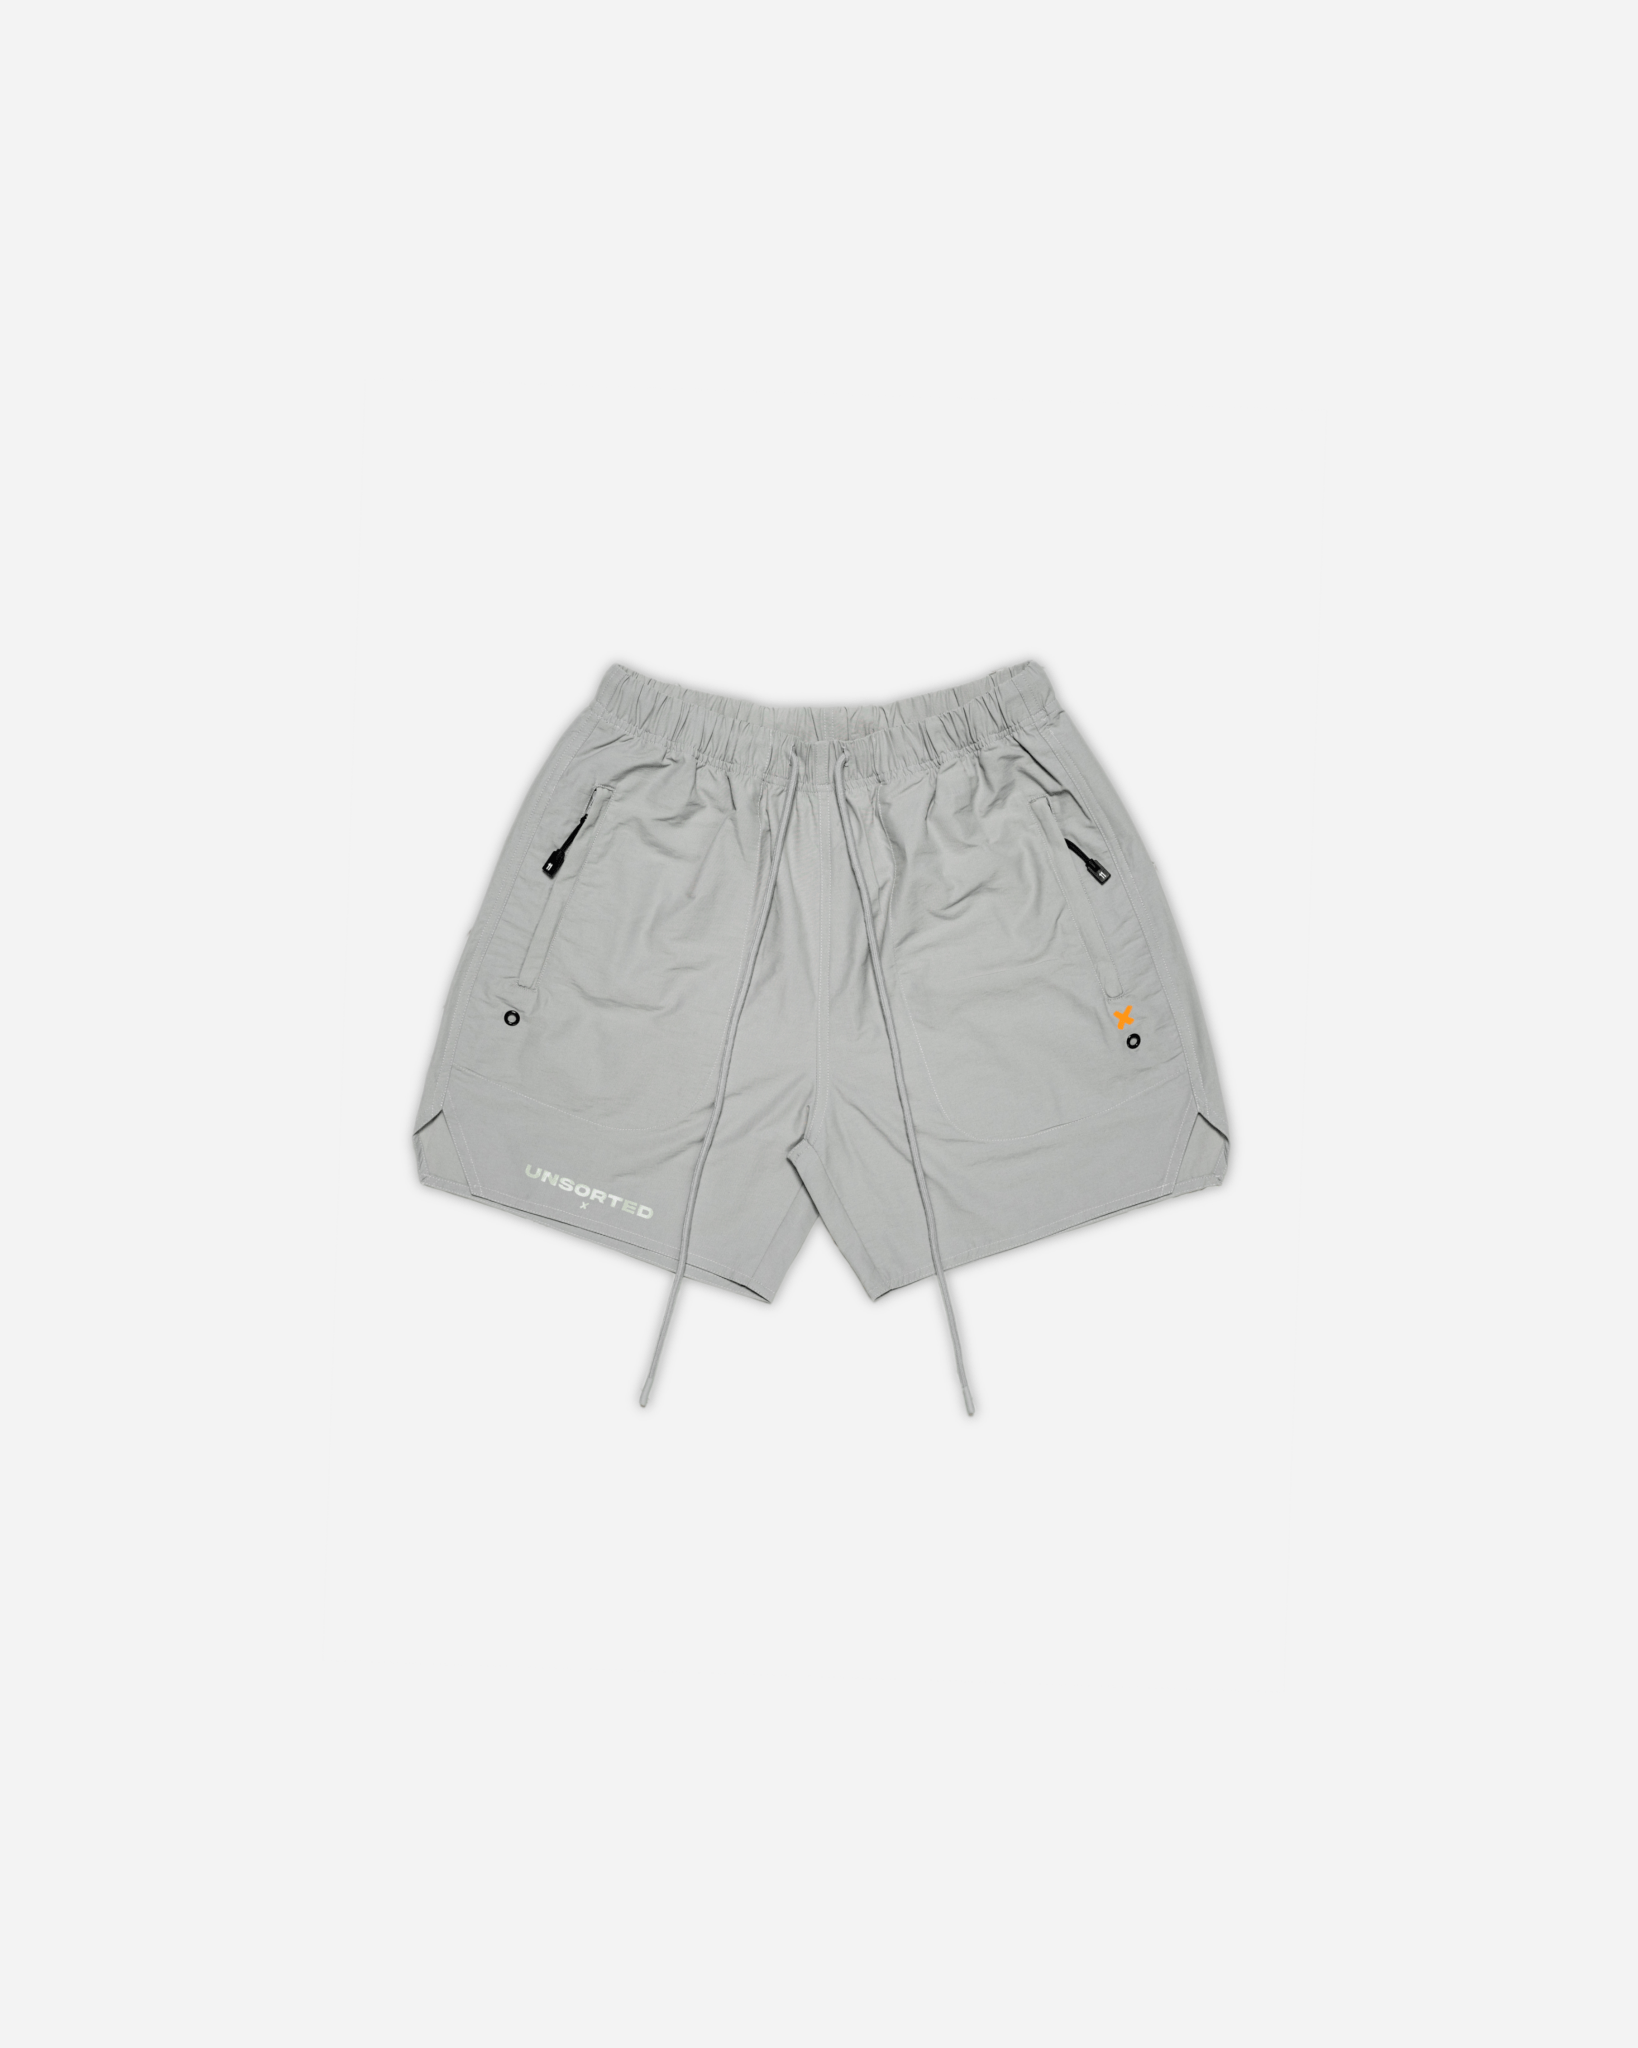 LEISURE SHORTS - Unsorted x